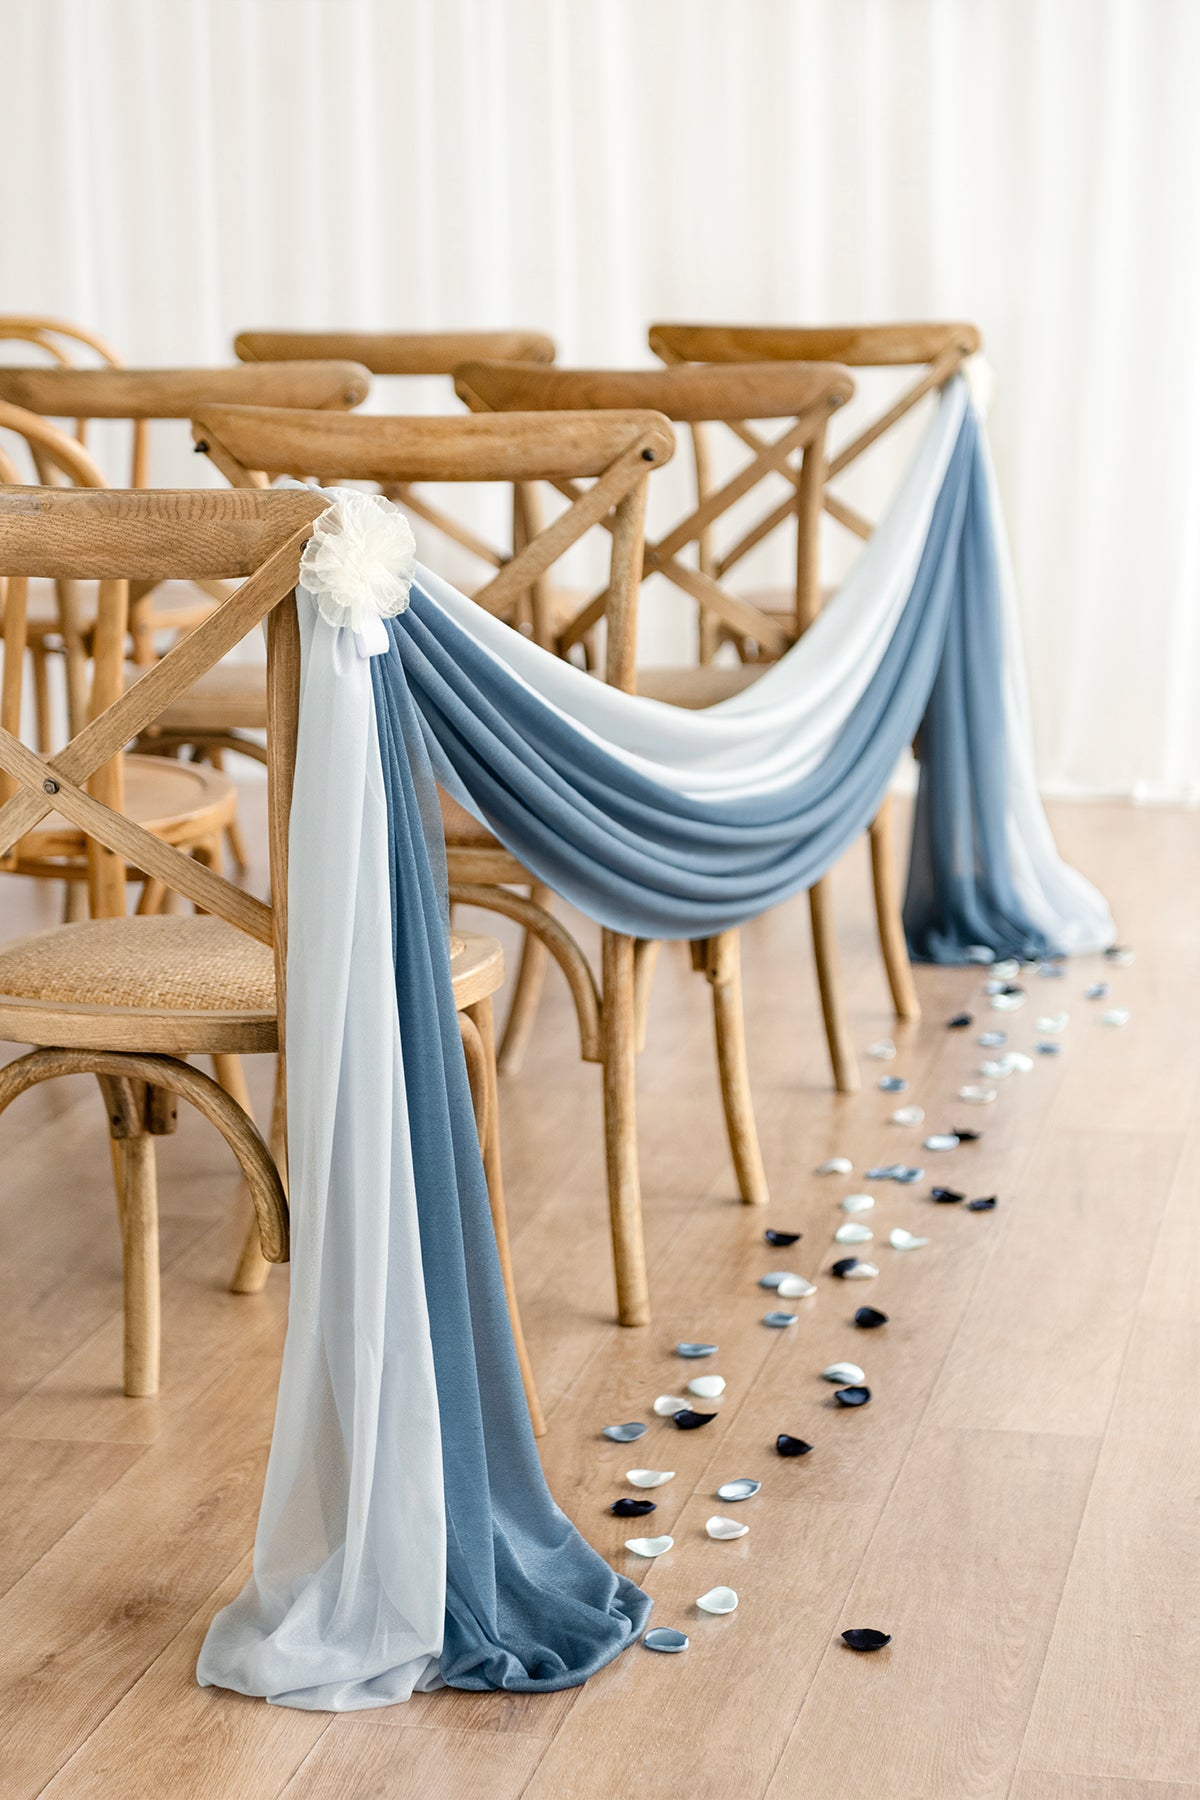 Sheer Aisle Swags for Church Wedding in Dusty Blue & Navy